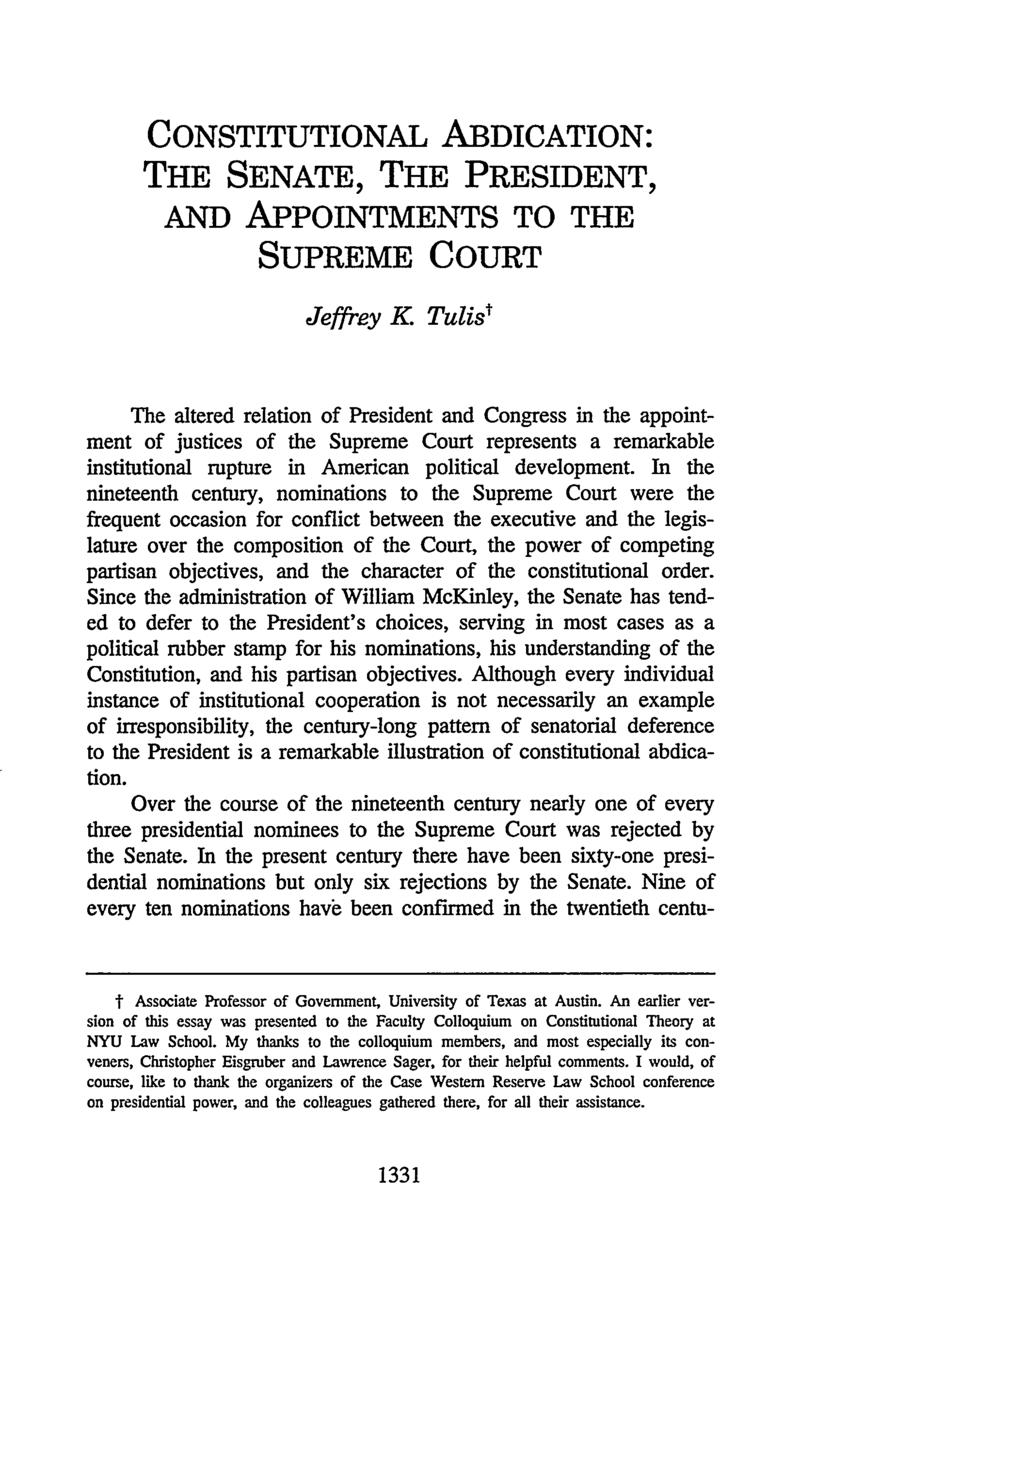 CONSTITUTIONAL ABDICATION: THE SENATE, THE PRESIDENT, AND APPOINTMENTS TO THE SUPREME COURT Jeffrey K Tulist The altered relation of President and Congress in the appointment of justices of the